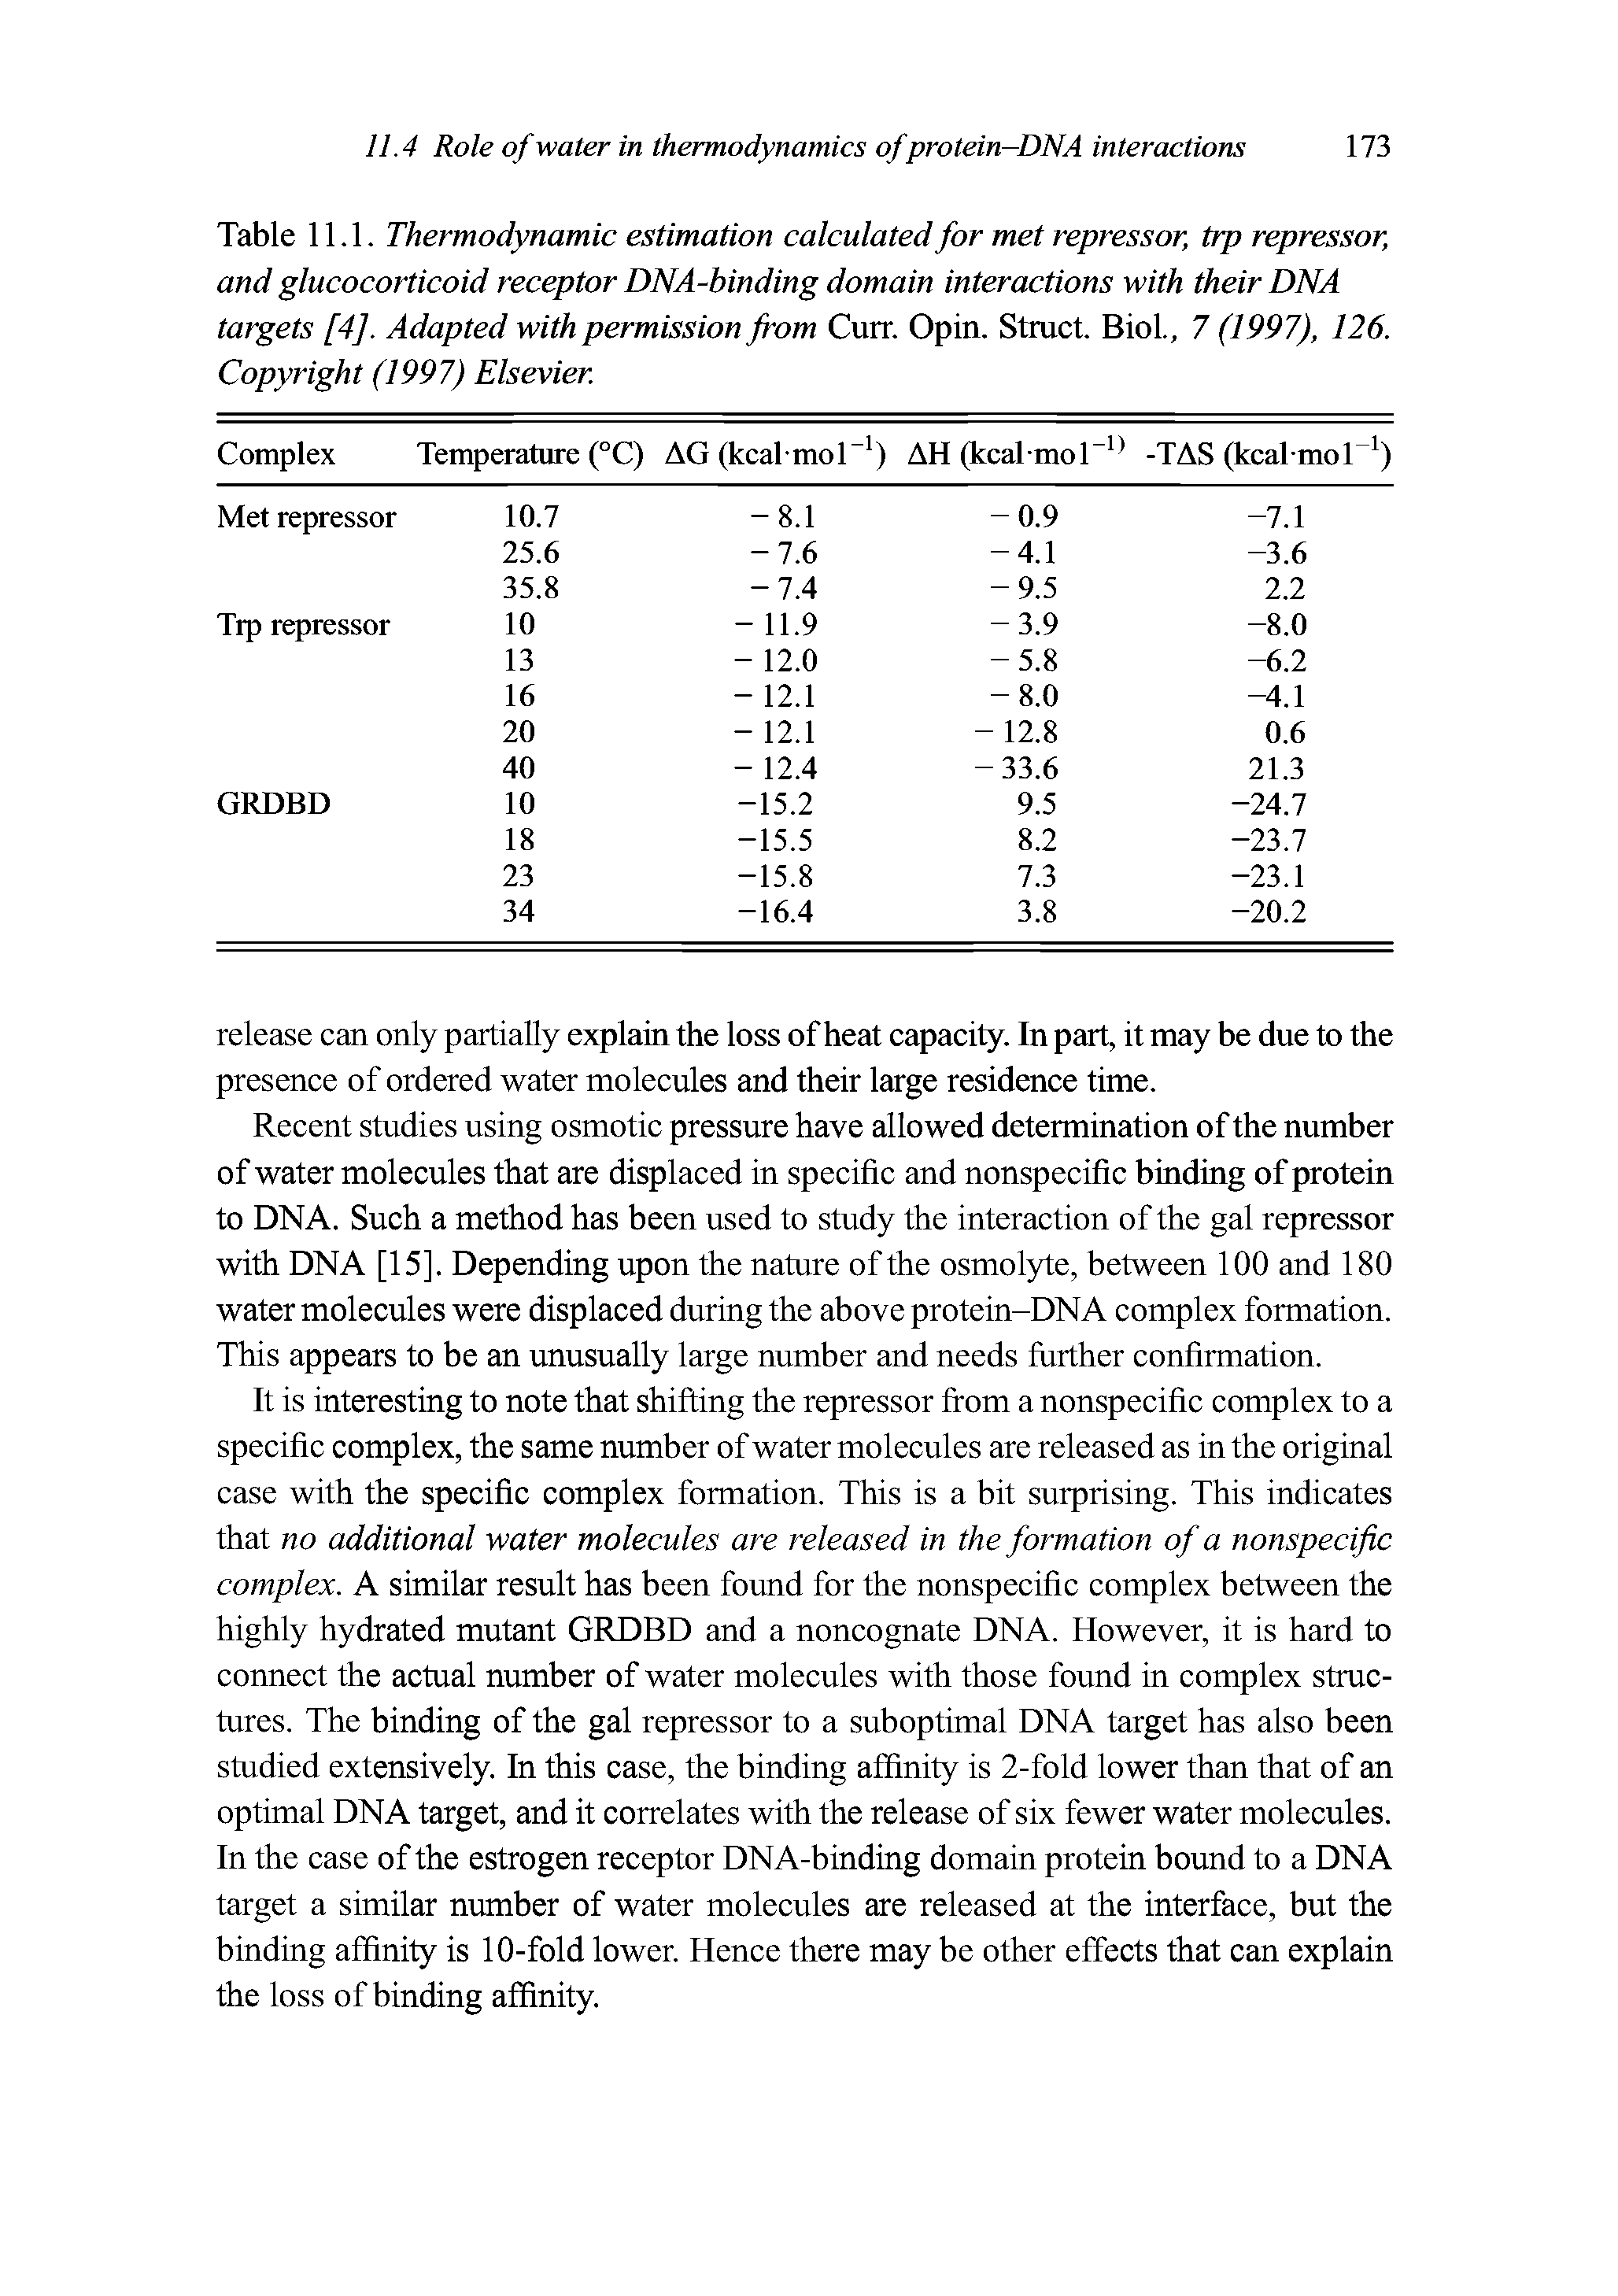 Table 11.1. Thermodynamic estimation calculated for met repressor, trp repressor, and glucocorticoid receptor DNA-binding domain interactions with their DNA targets [4J. Adapted with permission from Curr. Opin. Struct. Biol., 7 (1997), 126. Copyright (1997) Elsevier.